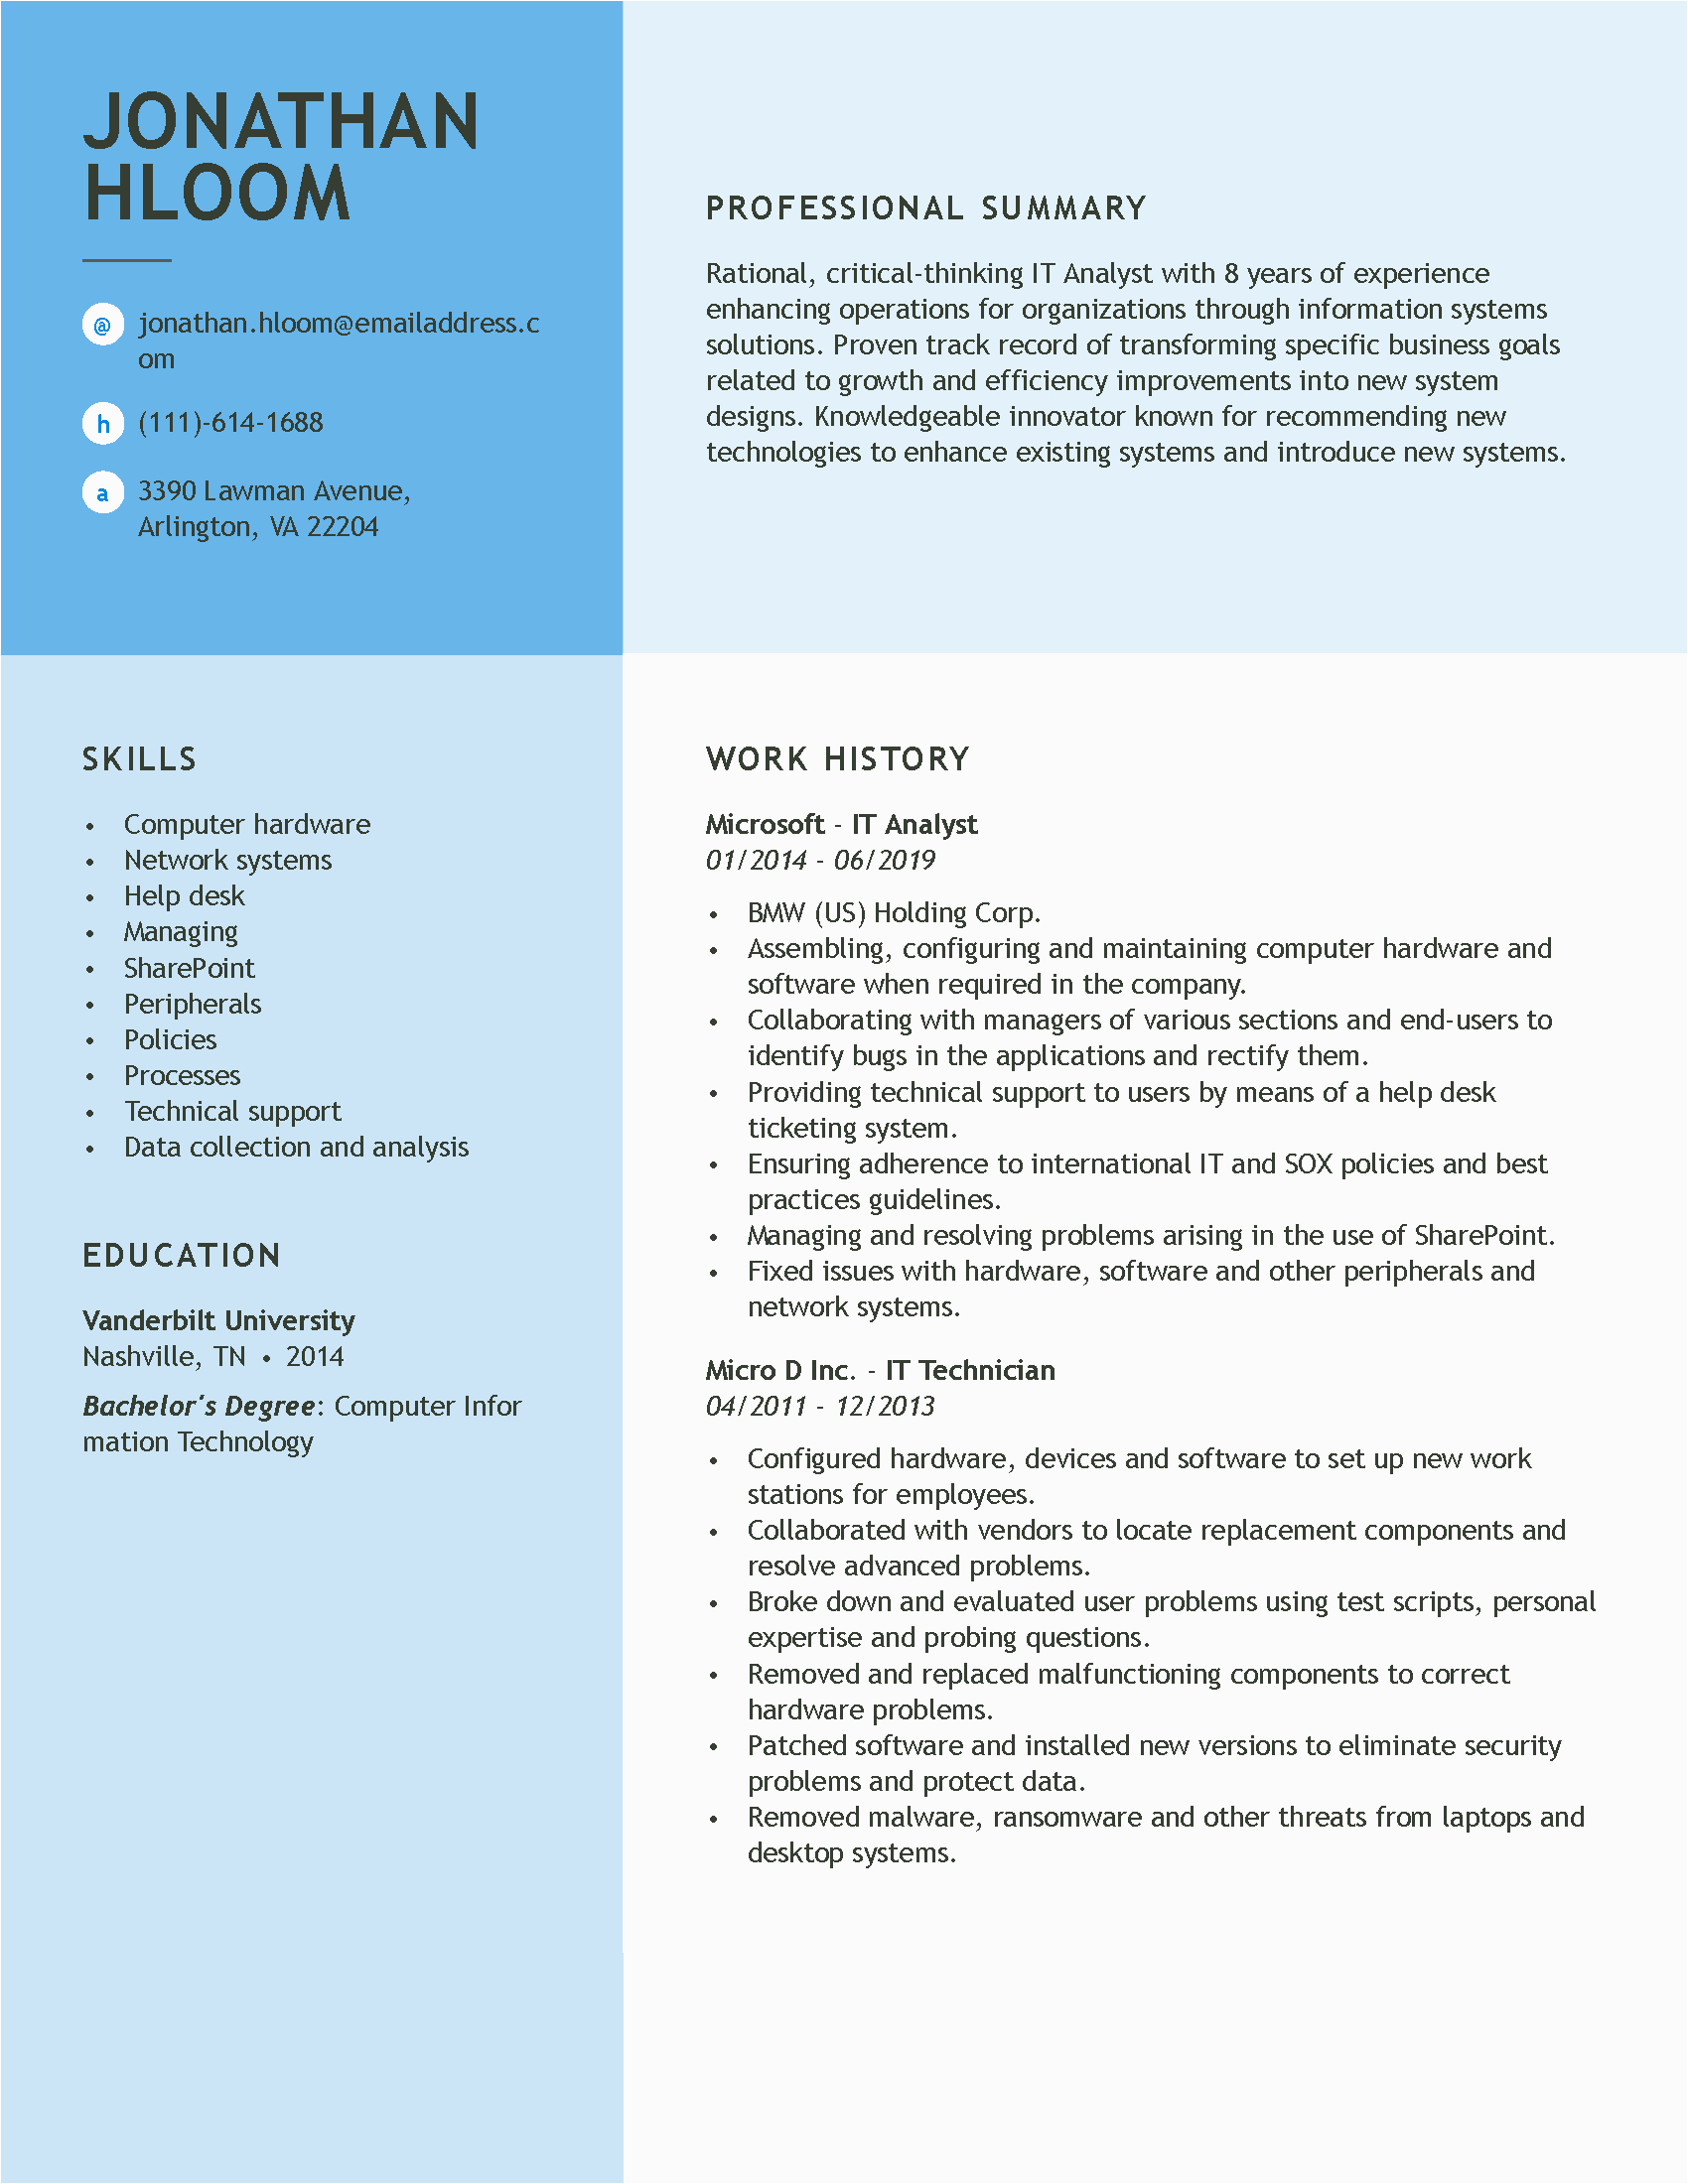 Resume Summary Samples for It Professionals Professional Resume Examples Our Most Popular Resumes In E Place